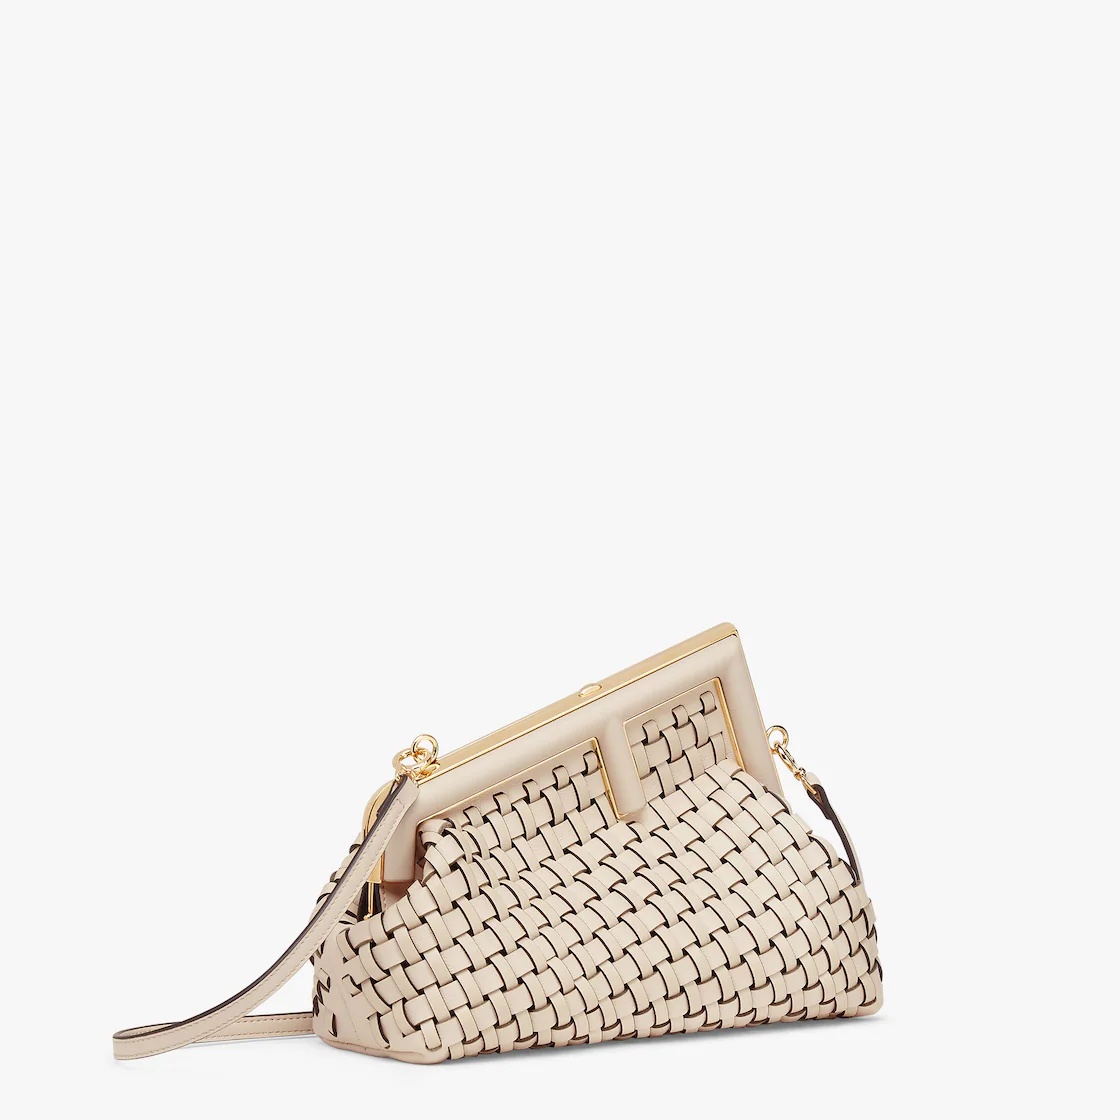 Small Fendi First bag made of finely braided beige leather, with oversized metal F clasp bound in to - 2